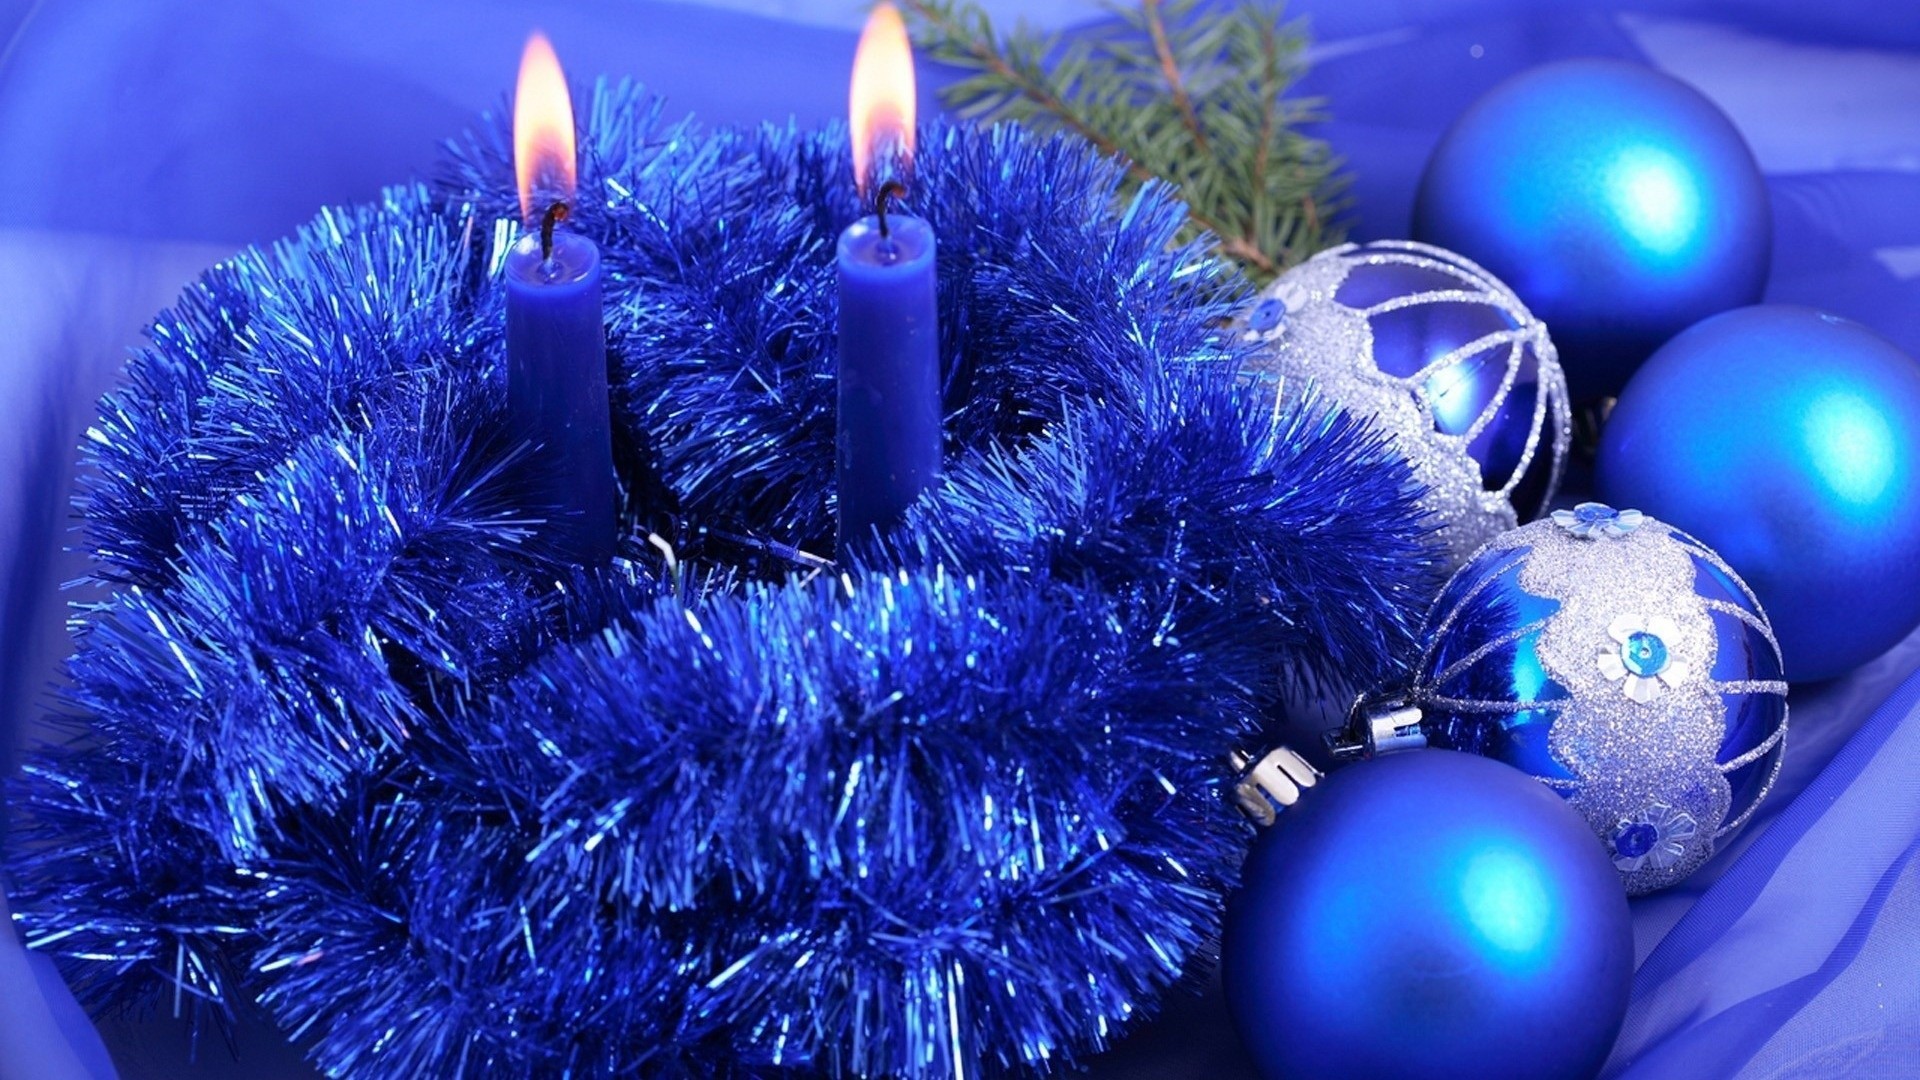 1920x1080 Christmas Trees Decorated Wallpaper Blue Candle And Balls Decoration Photos  Of Free Wallpapers. home interior ...